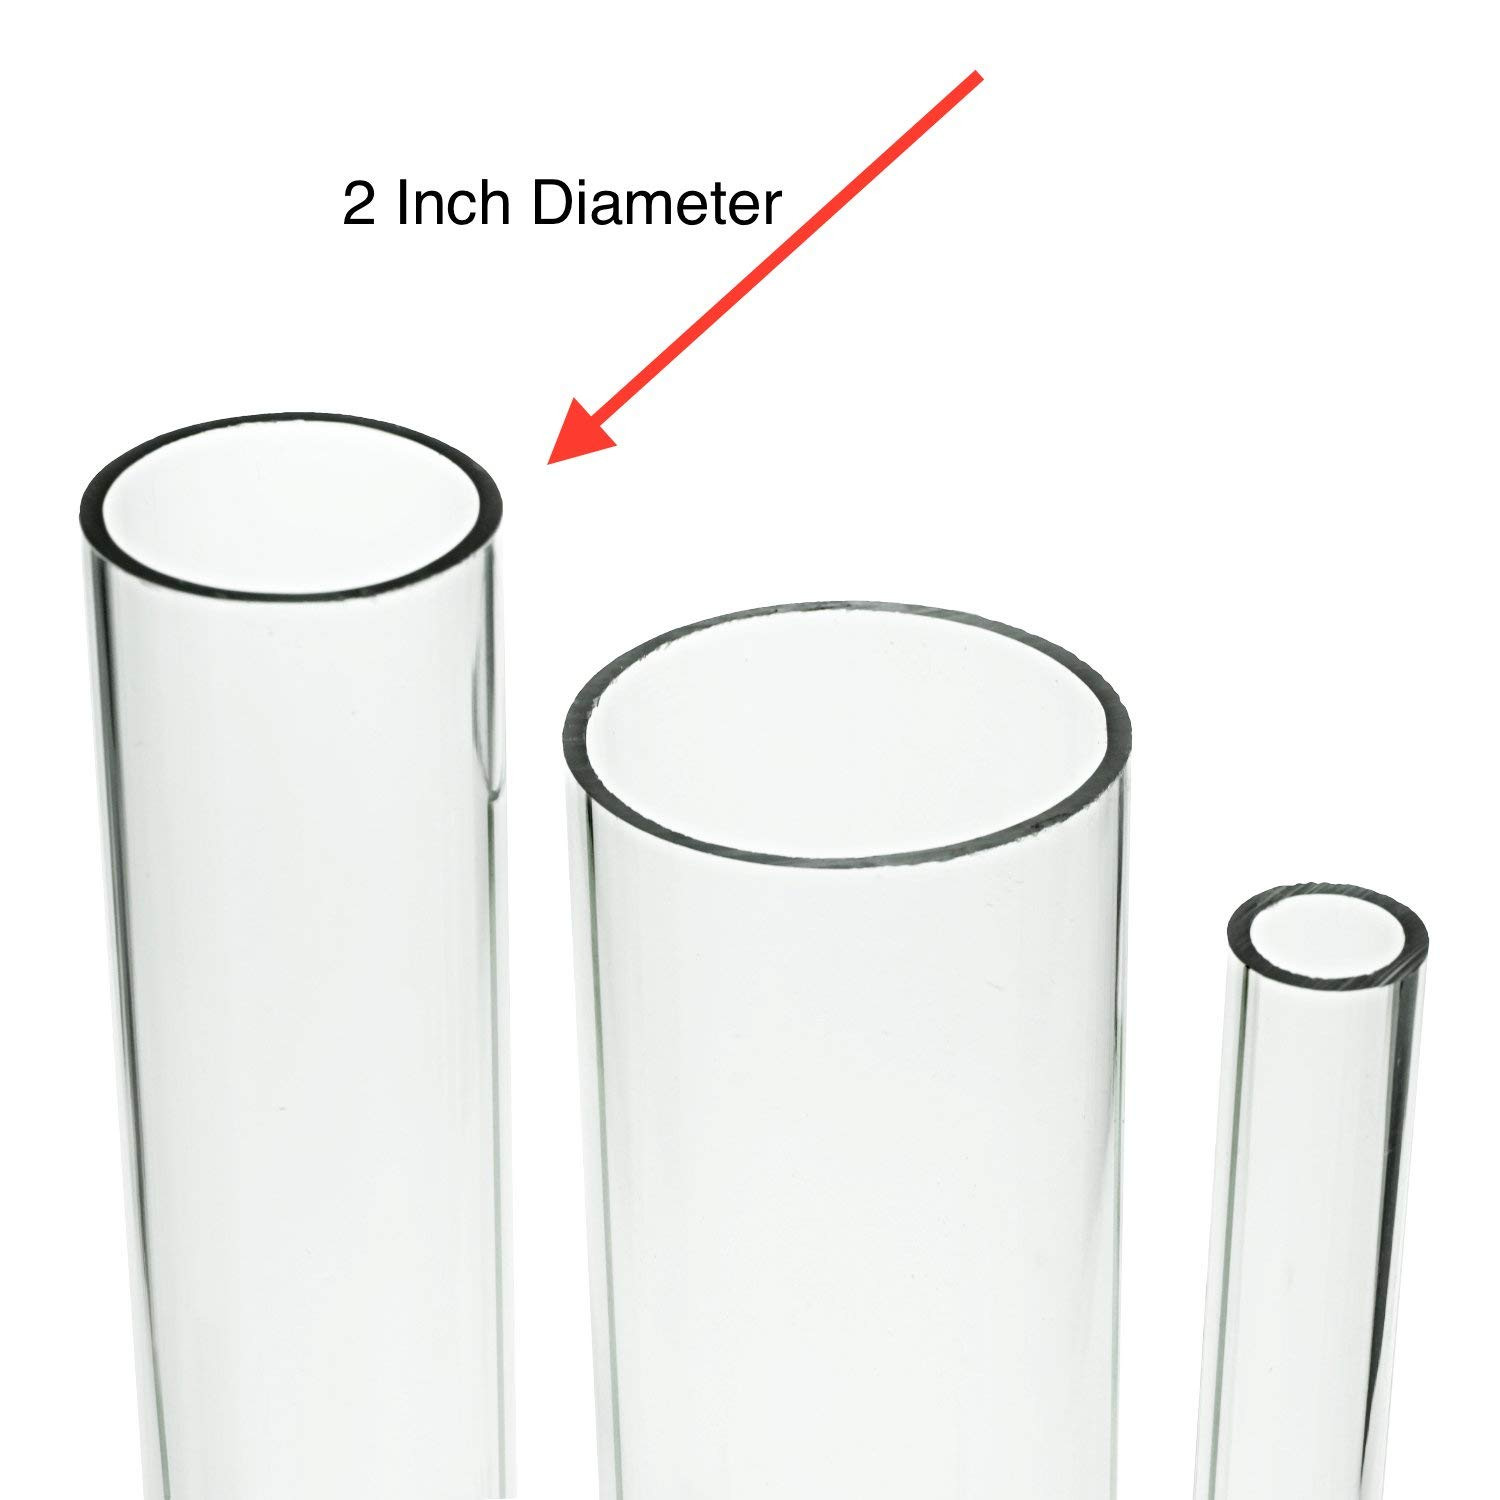 25 Great 36 Inch Cylinder Vase 2024 free download 36 inch cylinder vase of amazon com source one deluxe clear acrylic tube 2 inches thick 24 intended for amazon com source one deluxe clear acrylic tube 2 inches thick 24 inch 2 inch wide off